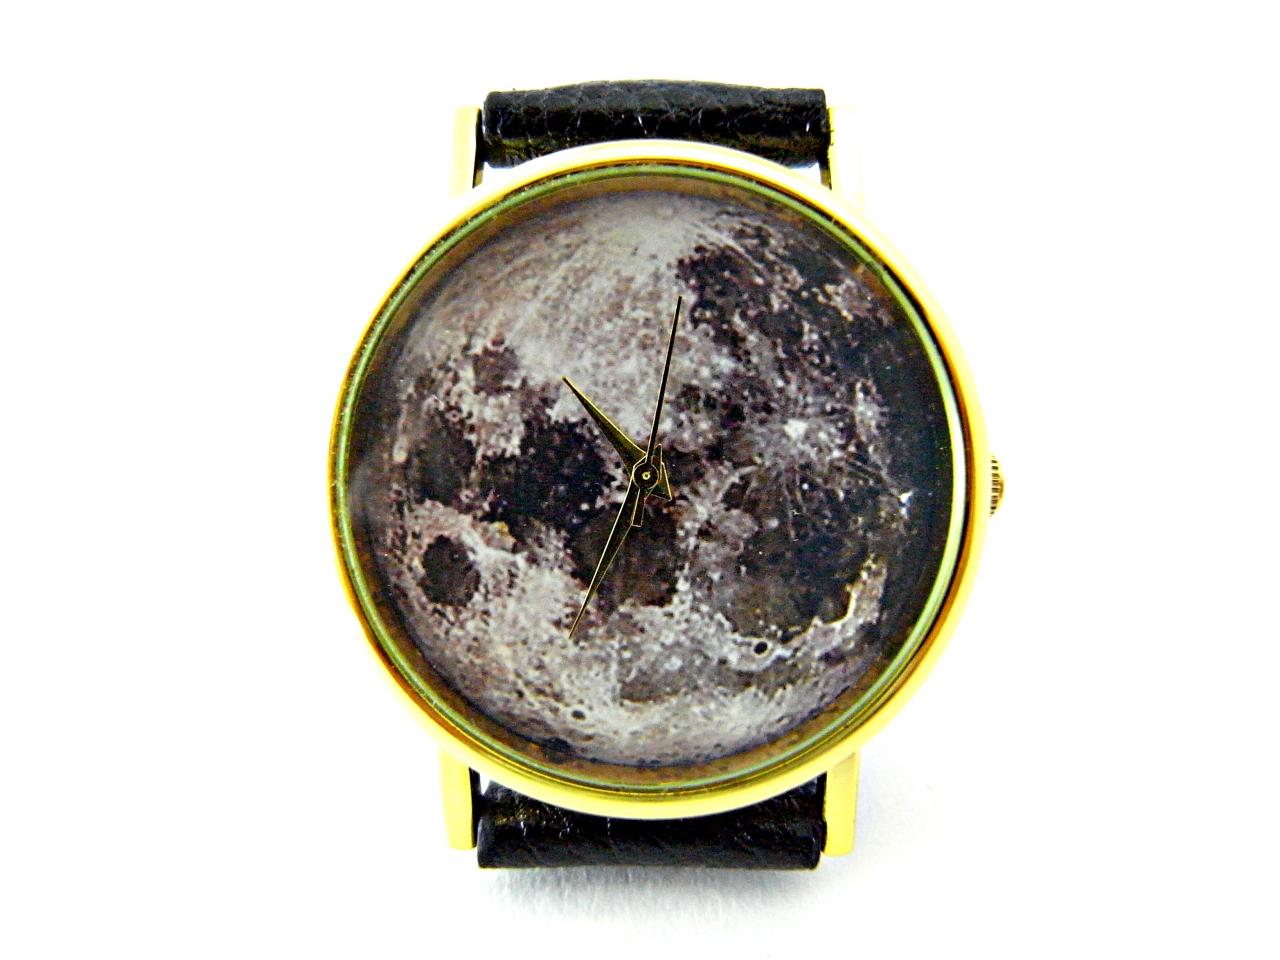 Moon Leather Wrist Watches, Woman Man Lady Unisex Watch, Genuine Leather Handmade Unique Watch #11